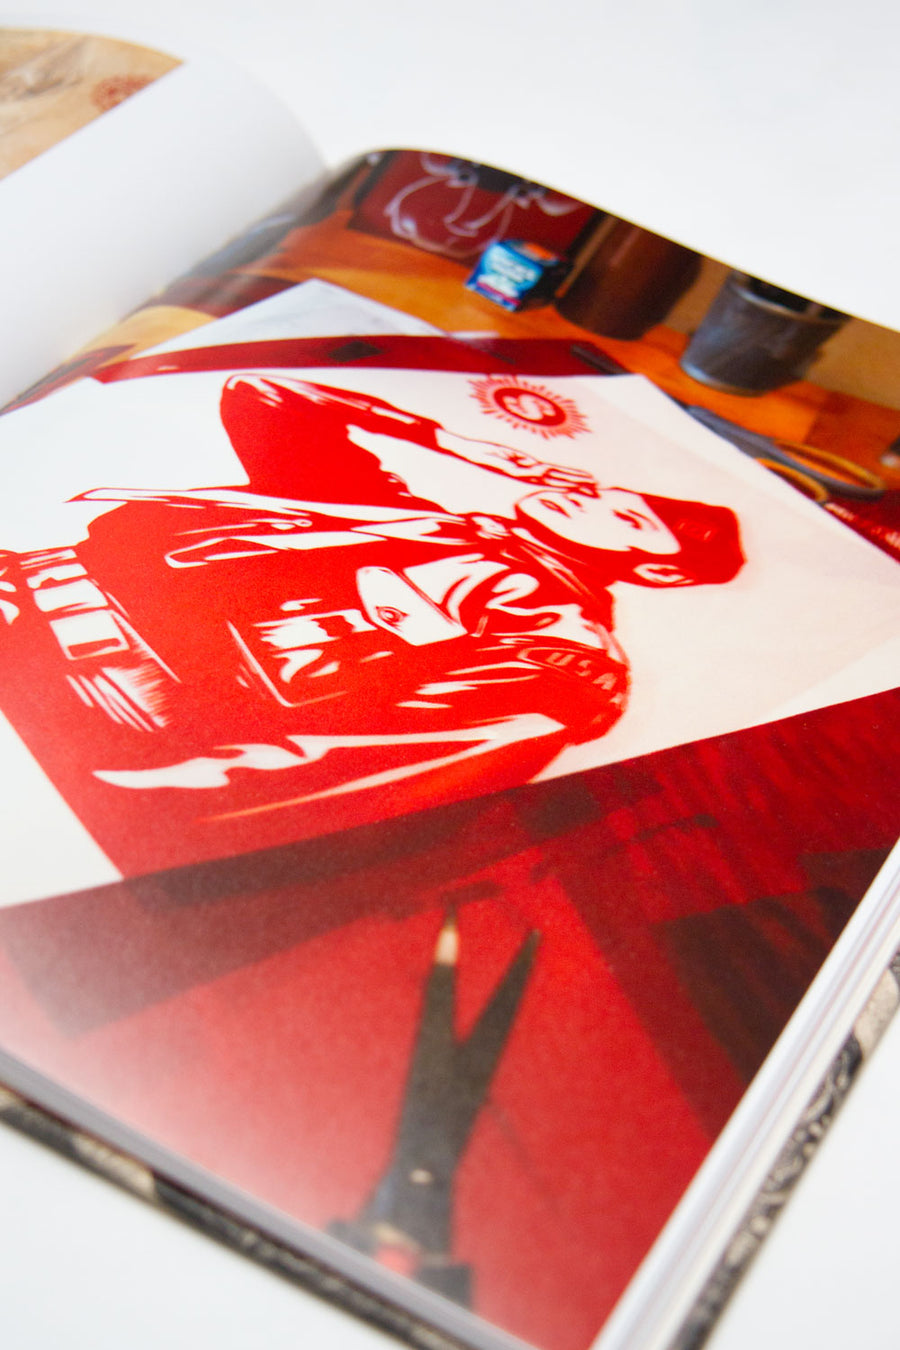 Obey Book: Covert to Overt by Shephard Fairey